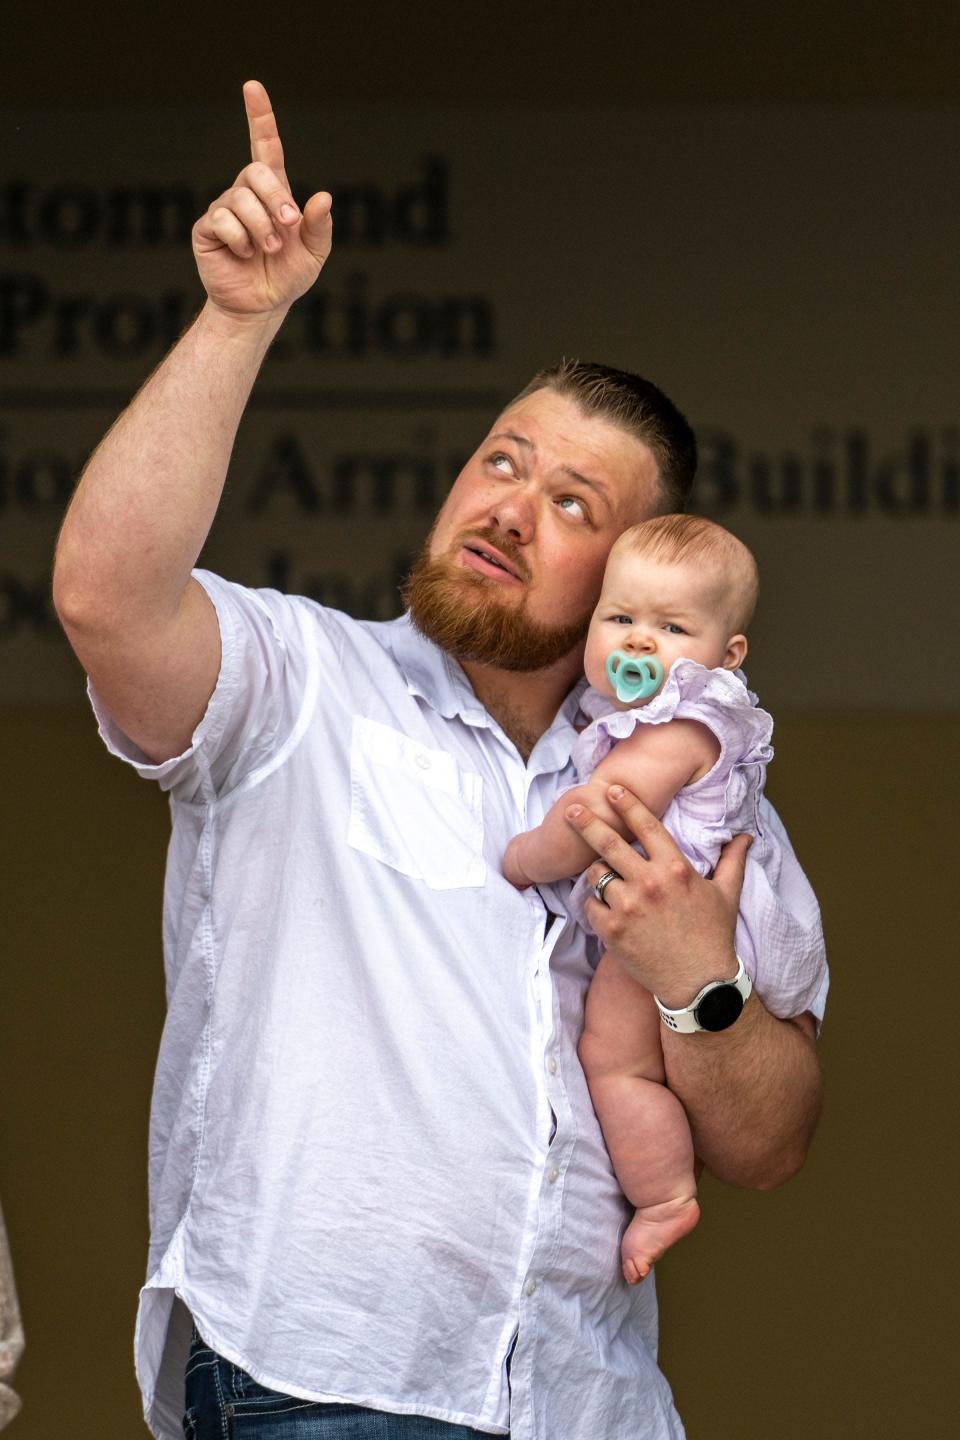 Steven Gendig, of Bargersville, holds his daughter, Ensley, as they await the arrival of a shipment of baby formula at the airport. The arrival of the first shipment of formula brought to the United States under Operation Fly Formula in response to the infant formula shortage caused by Abbott Nutrition’s voluntary recall arrived at the Indianapolis International Airport, Sunday, May 22, 2022, on a Air Force C-17.